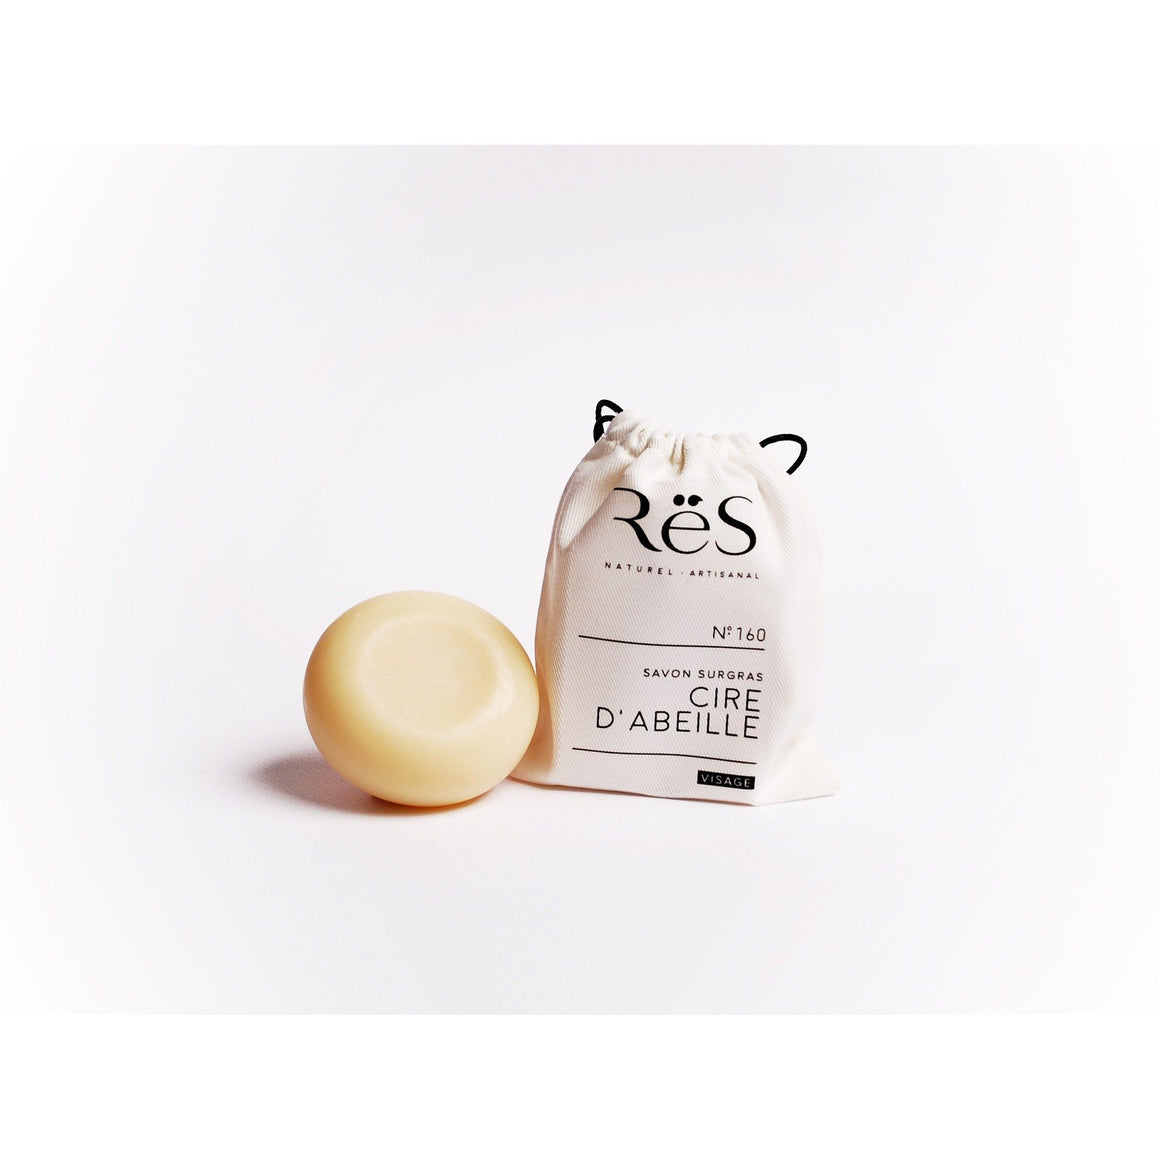 Beeswax Soap by ReS Natural